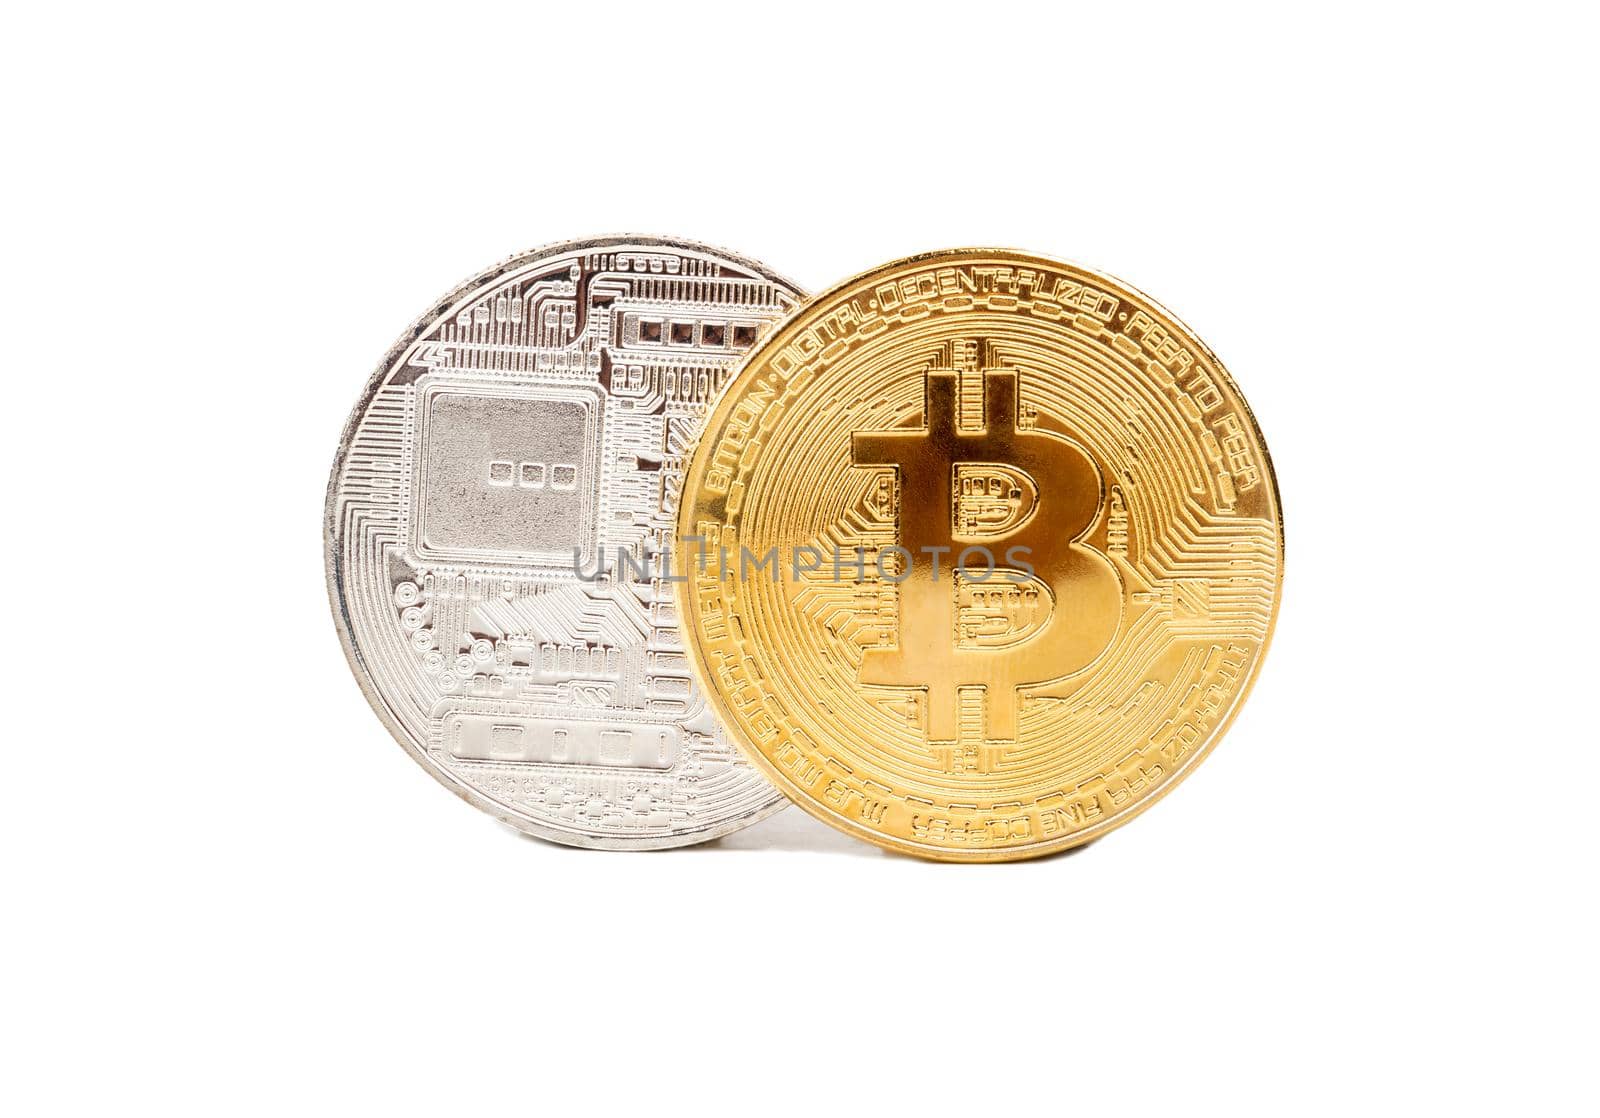 Gold and silver bitcoin coins on a white background